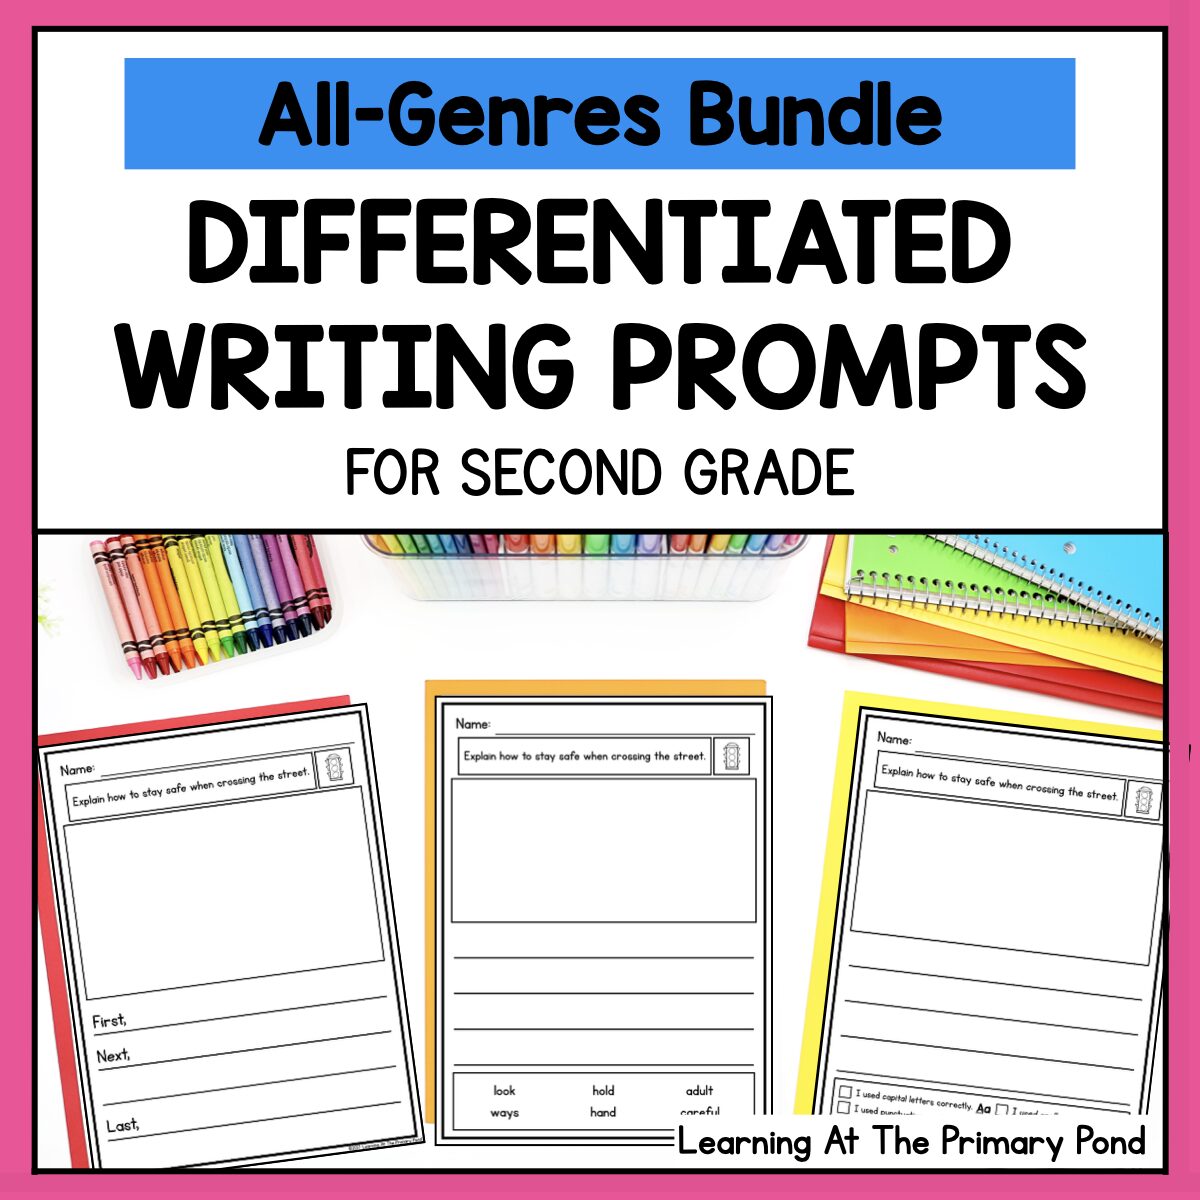 DIFFERENTIATED WRITING PROMTS FROM SECOND GRADE